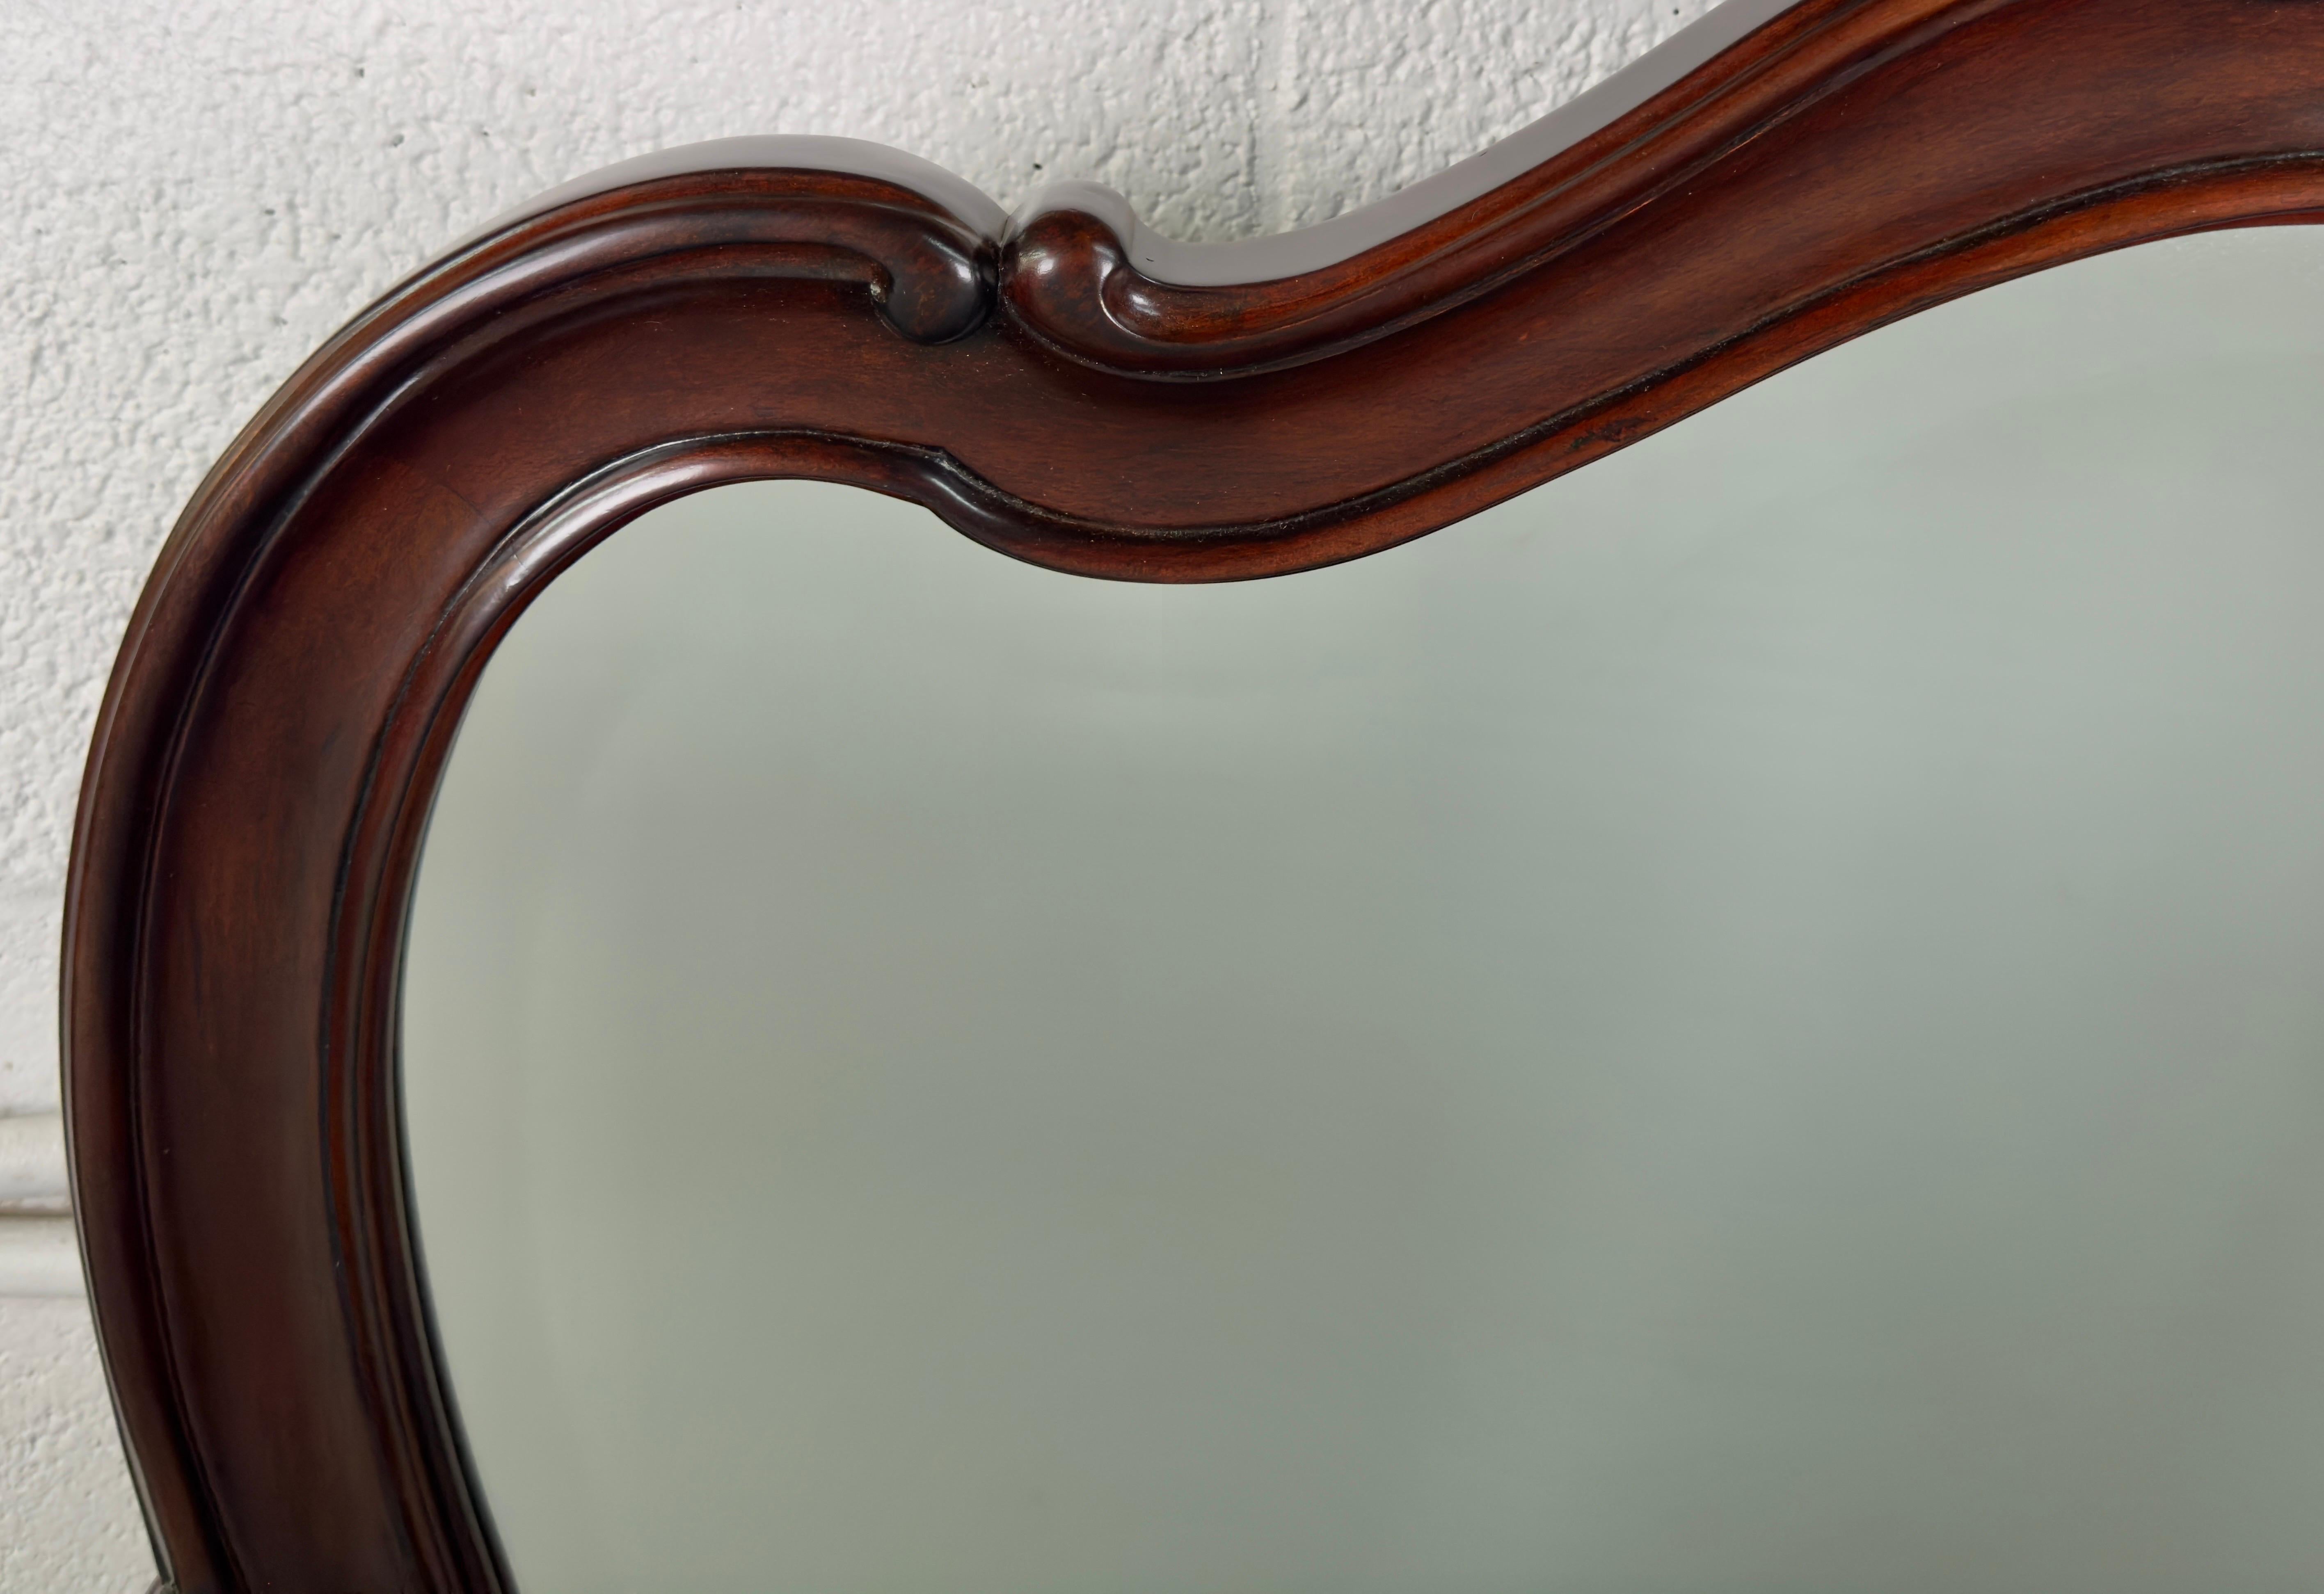 20th Century French Louis XV Style Carved Cherry Wood & Beveled Glass Wall or Mantel Mirror For Sale